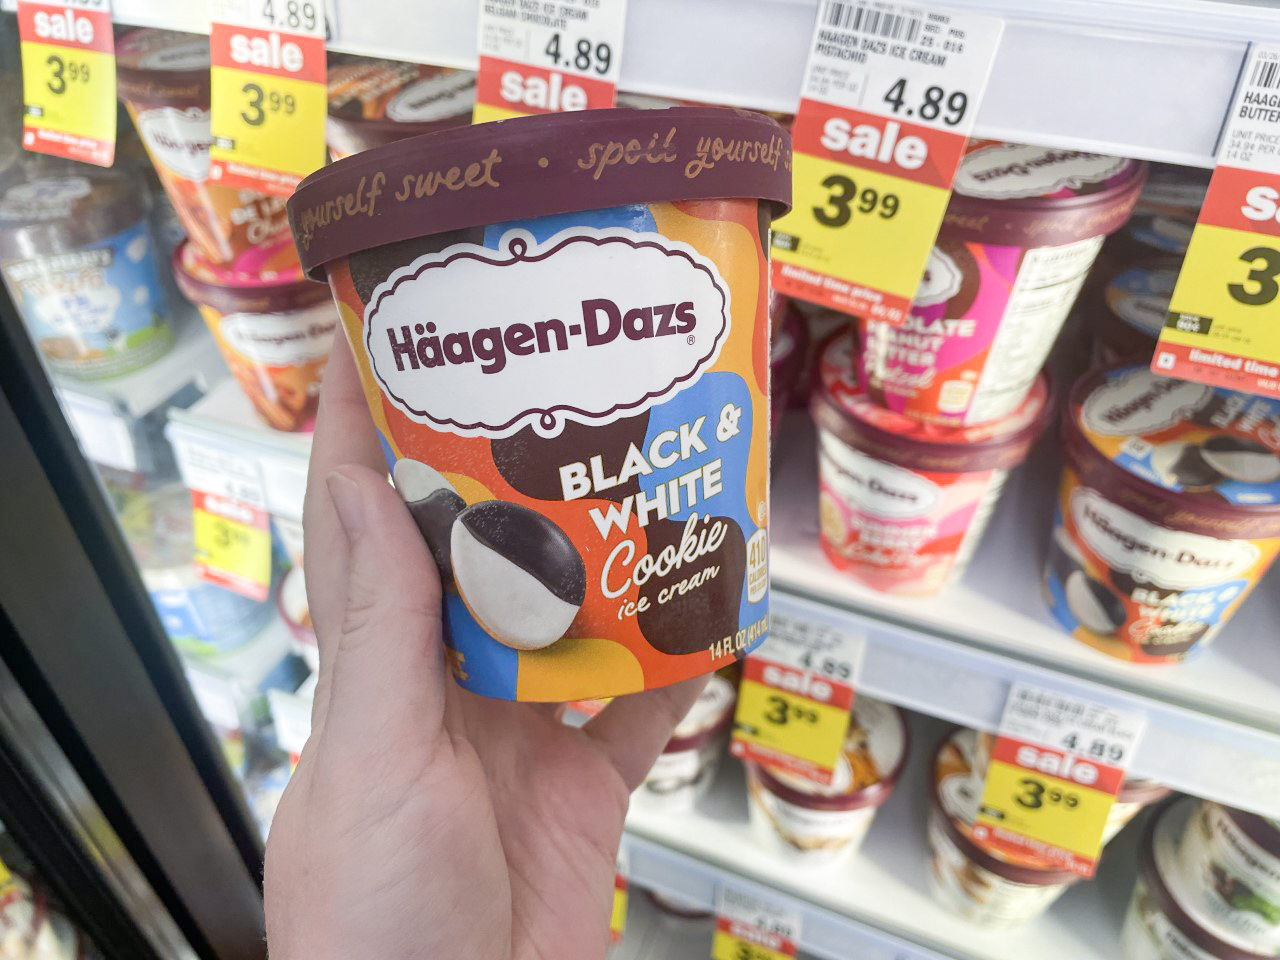 Haagen-Dazs Ice Cream, Only $ at Meijer (Plus 150 Shopkick Credits) -  The Krazy Coupon Lady